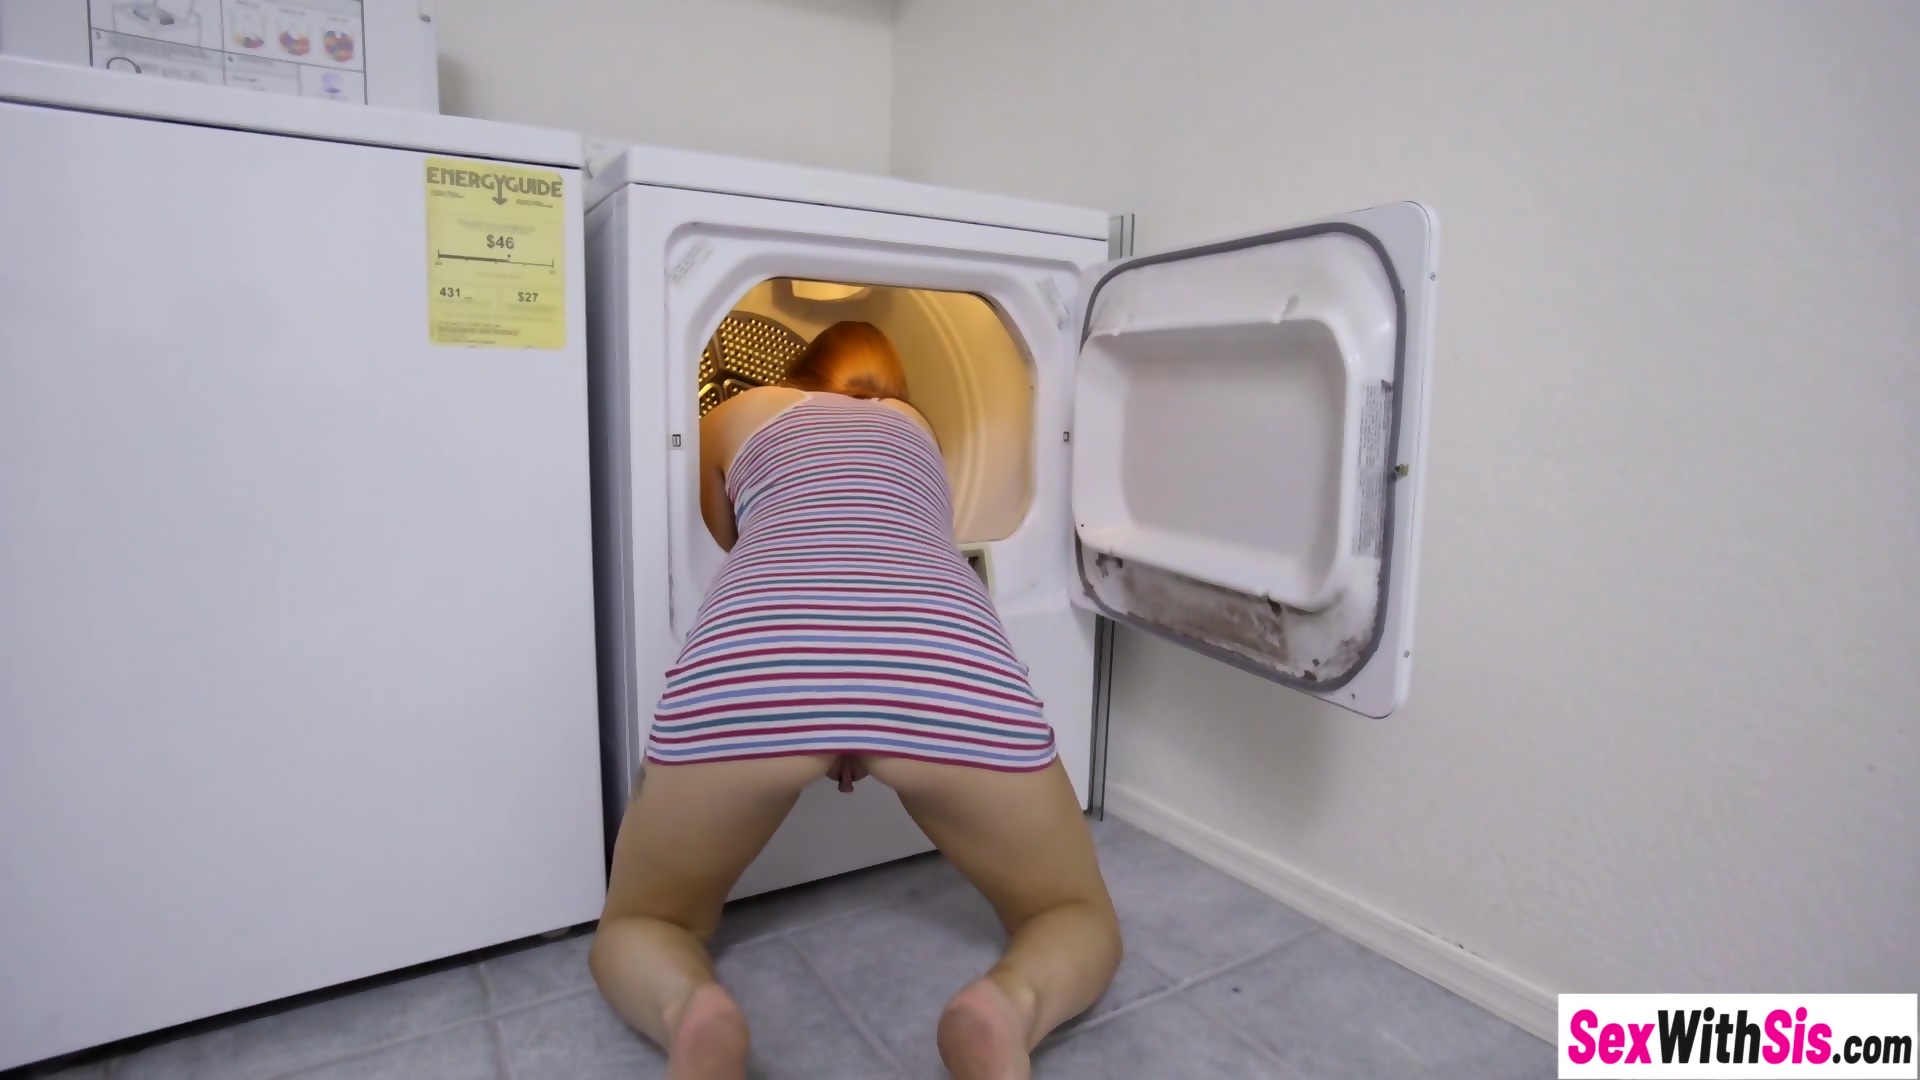 Teen Stepsister Stuck In The Dryer Gets Fucked By Stepbrother - EPORNER